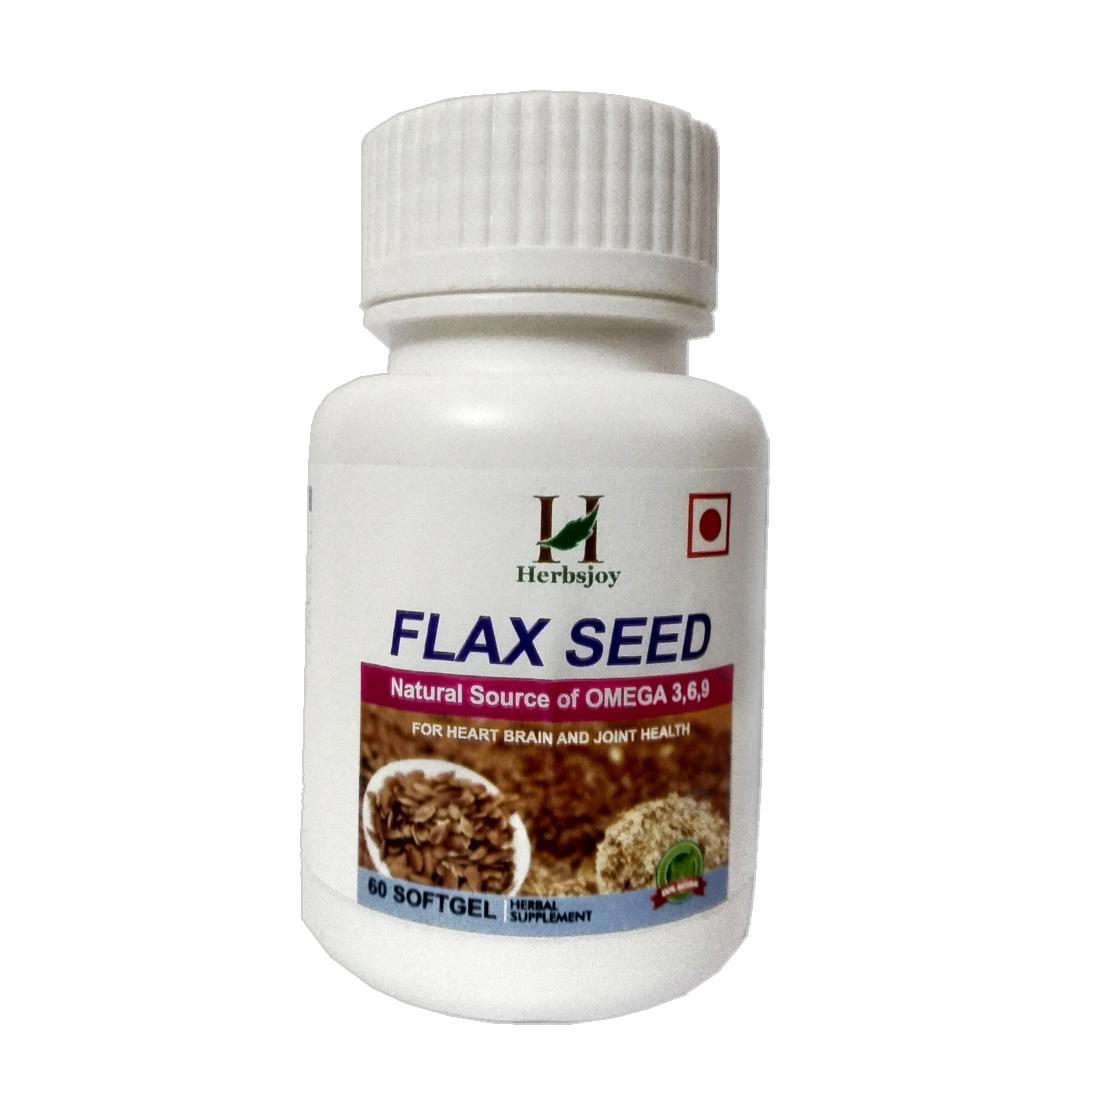 Herbsjoy Flaxseed Oil Capsule is a rich wellspring of omega